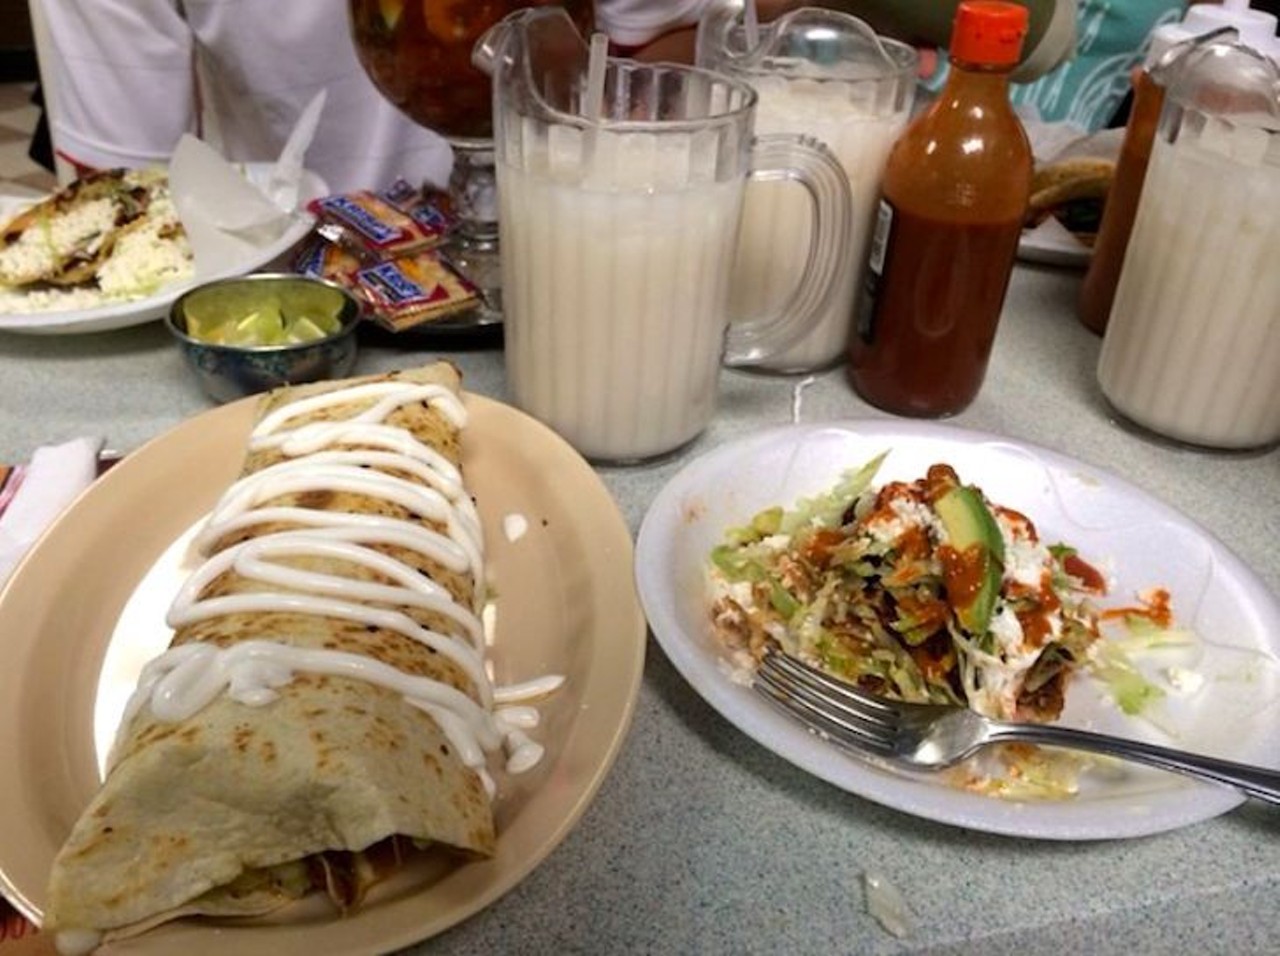 El Pueblo Mexican Restaurant
7124 Aloma Ave, Winter Park, 407- 677-5534
This small spot packs big flavor with its sopas, spicy salsa and $1.75 tacos. Share a refreshing pitcher of horchata with your dining companion for a sweet finish. 
Photo via kikiestradac/Instagram